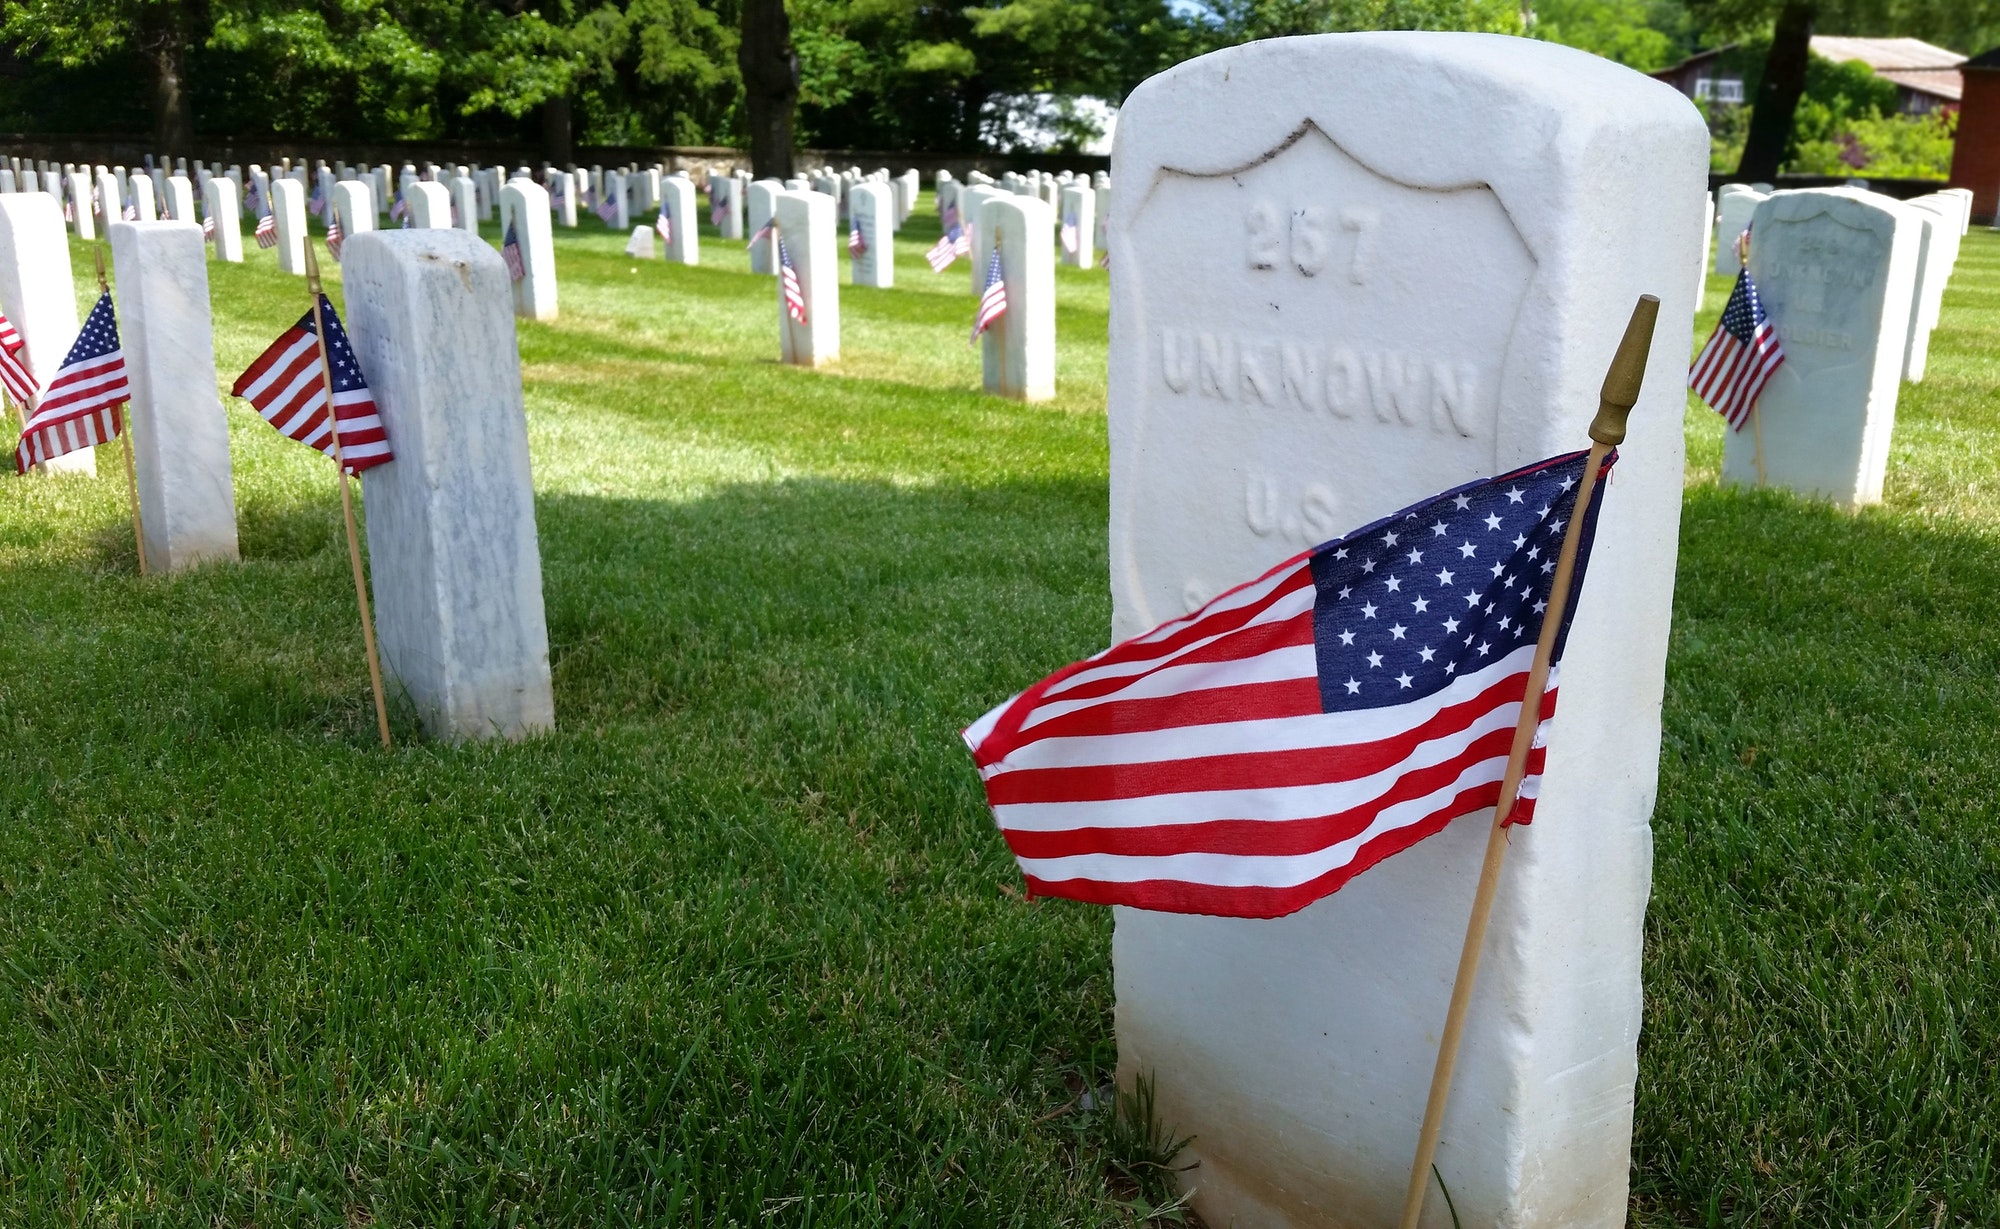 Rows of grave stones in a National cemetery decorated with American flags for Memorial Day.